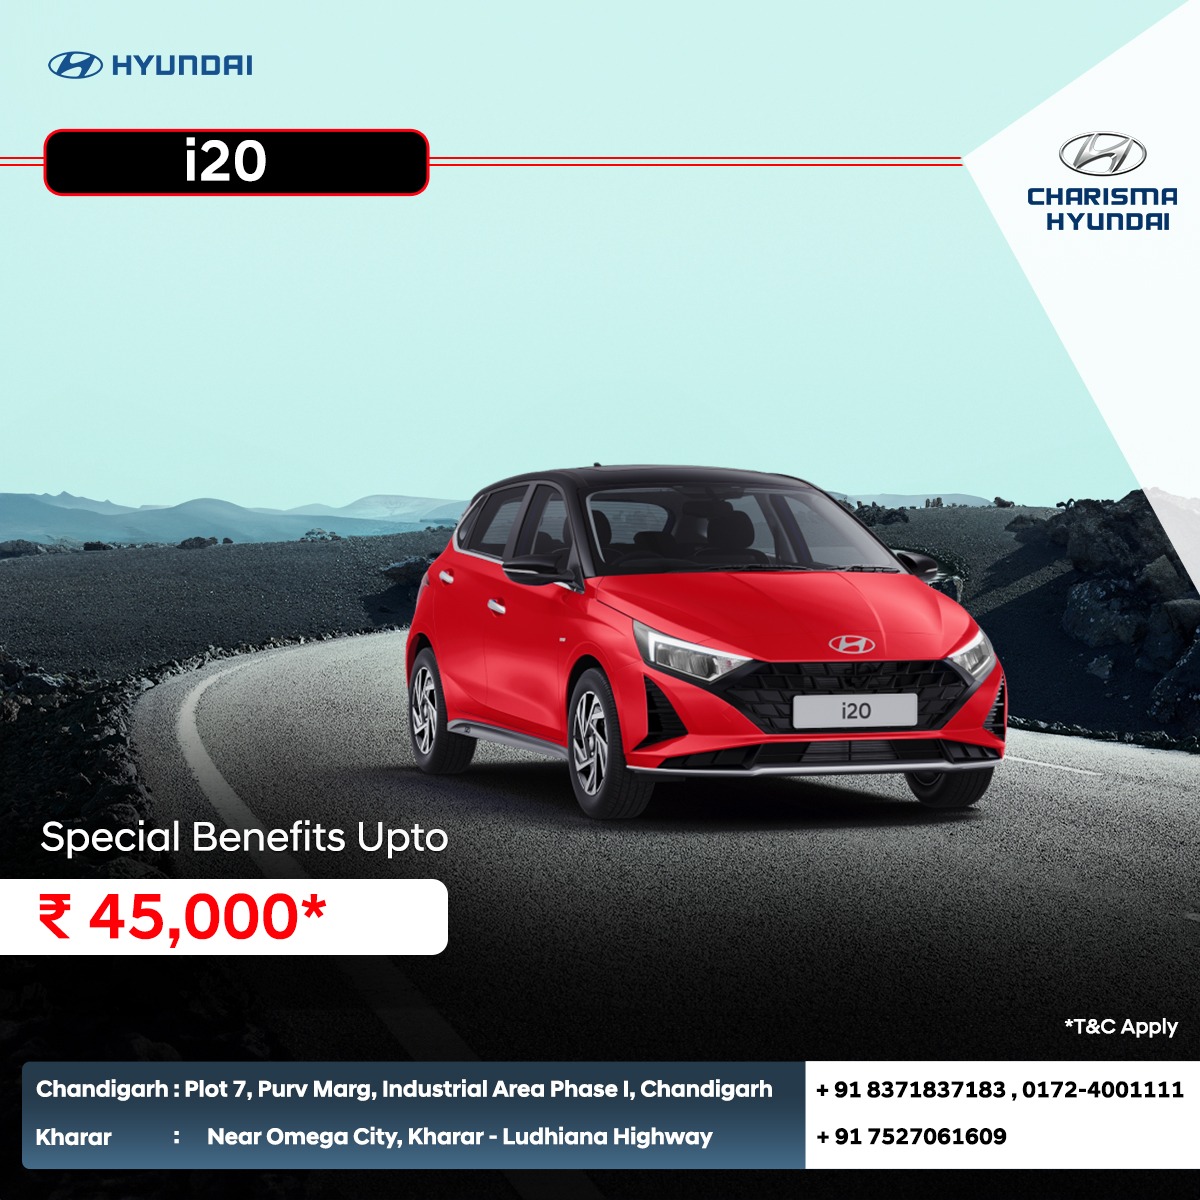 Discover the all-new Hyundai i20 – where innovation meets style!  With its dynamic design and cutting-edge features, the Hyundai i20 is ready to make every drive extraordinary.
Book your test drive now! Call - +91 8371837183, 0172-4001111

#CharismaHyundai #Hyundai #HyundaiIndia